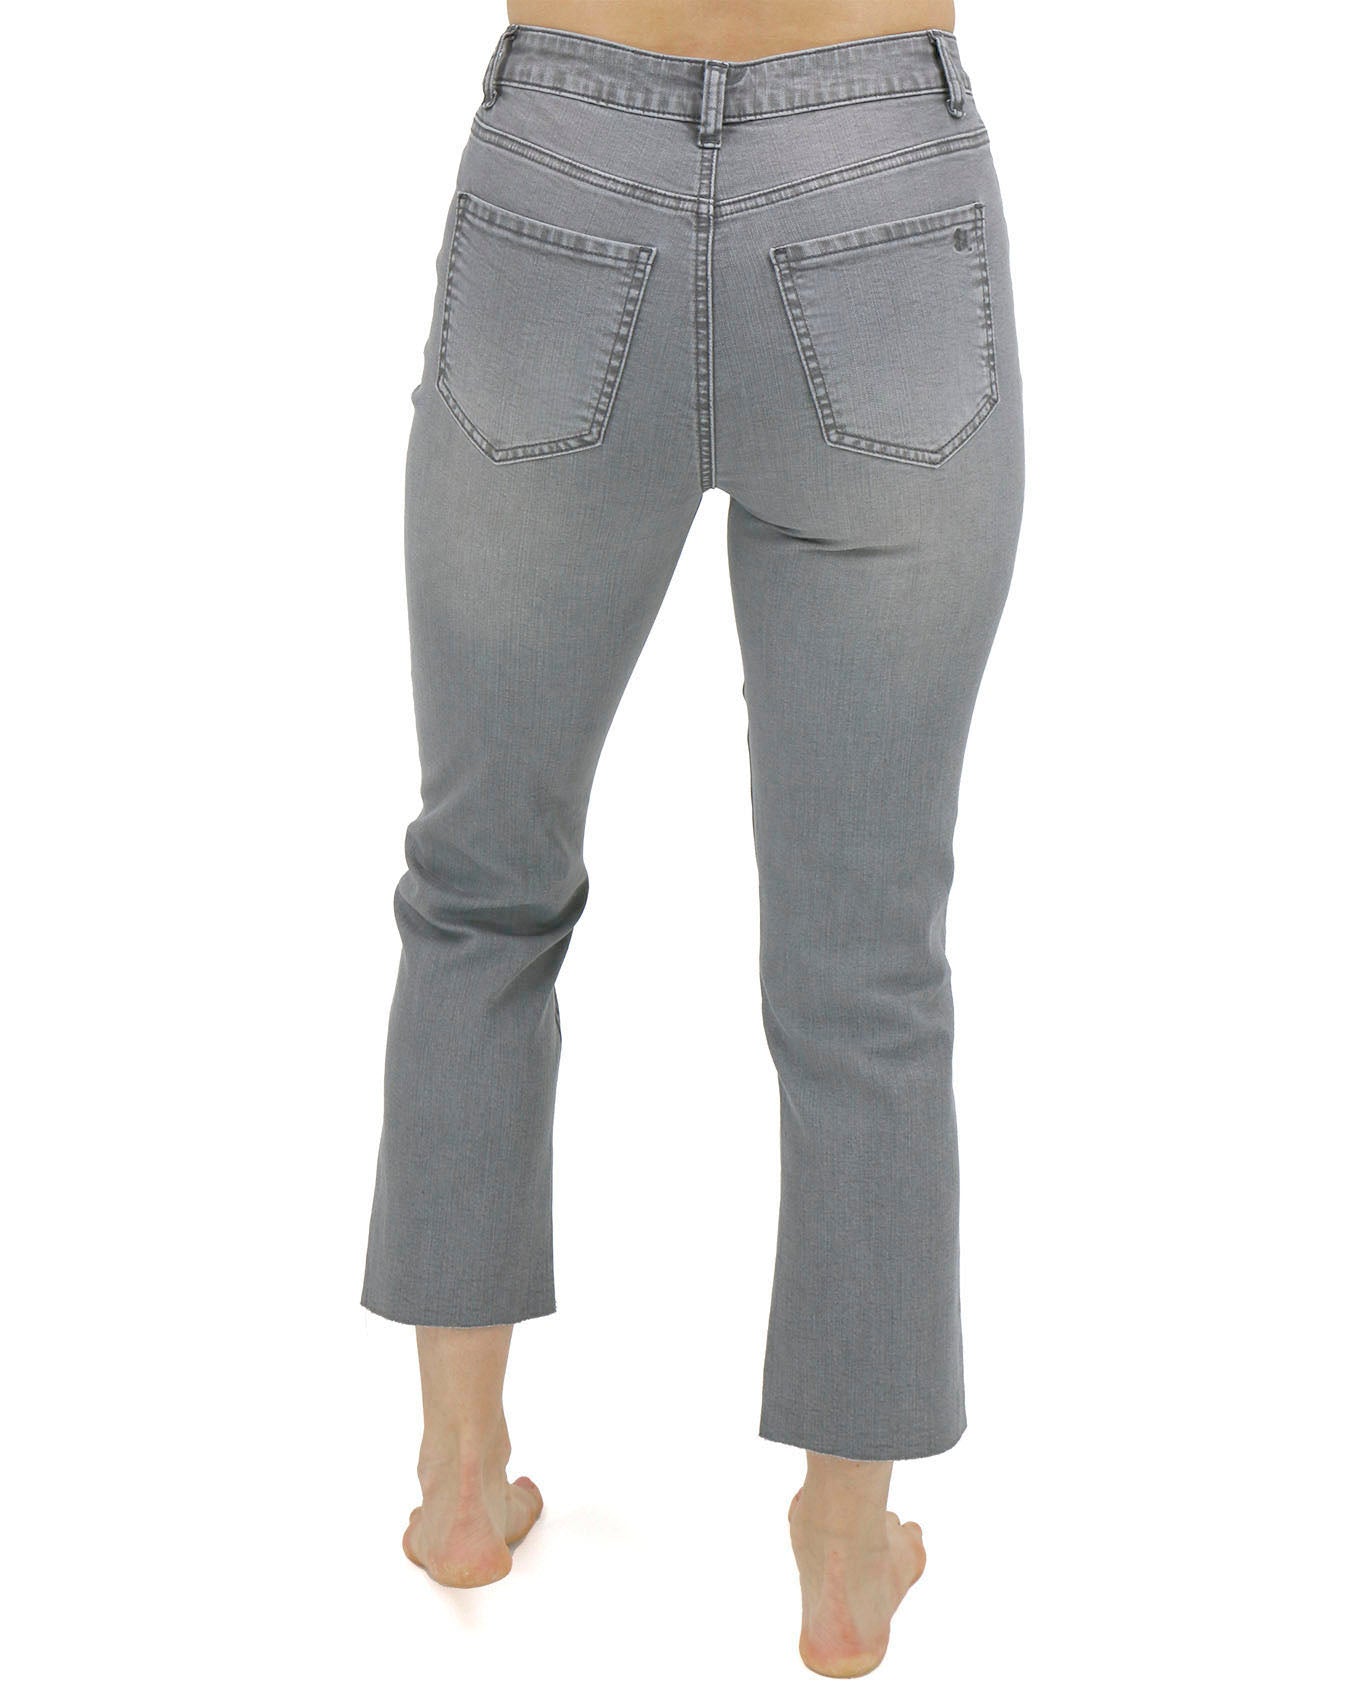 Back stock shot of Gray Mel’s Fave Distressed Cropped Straight Leg Colored Denim